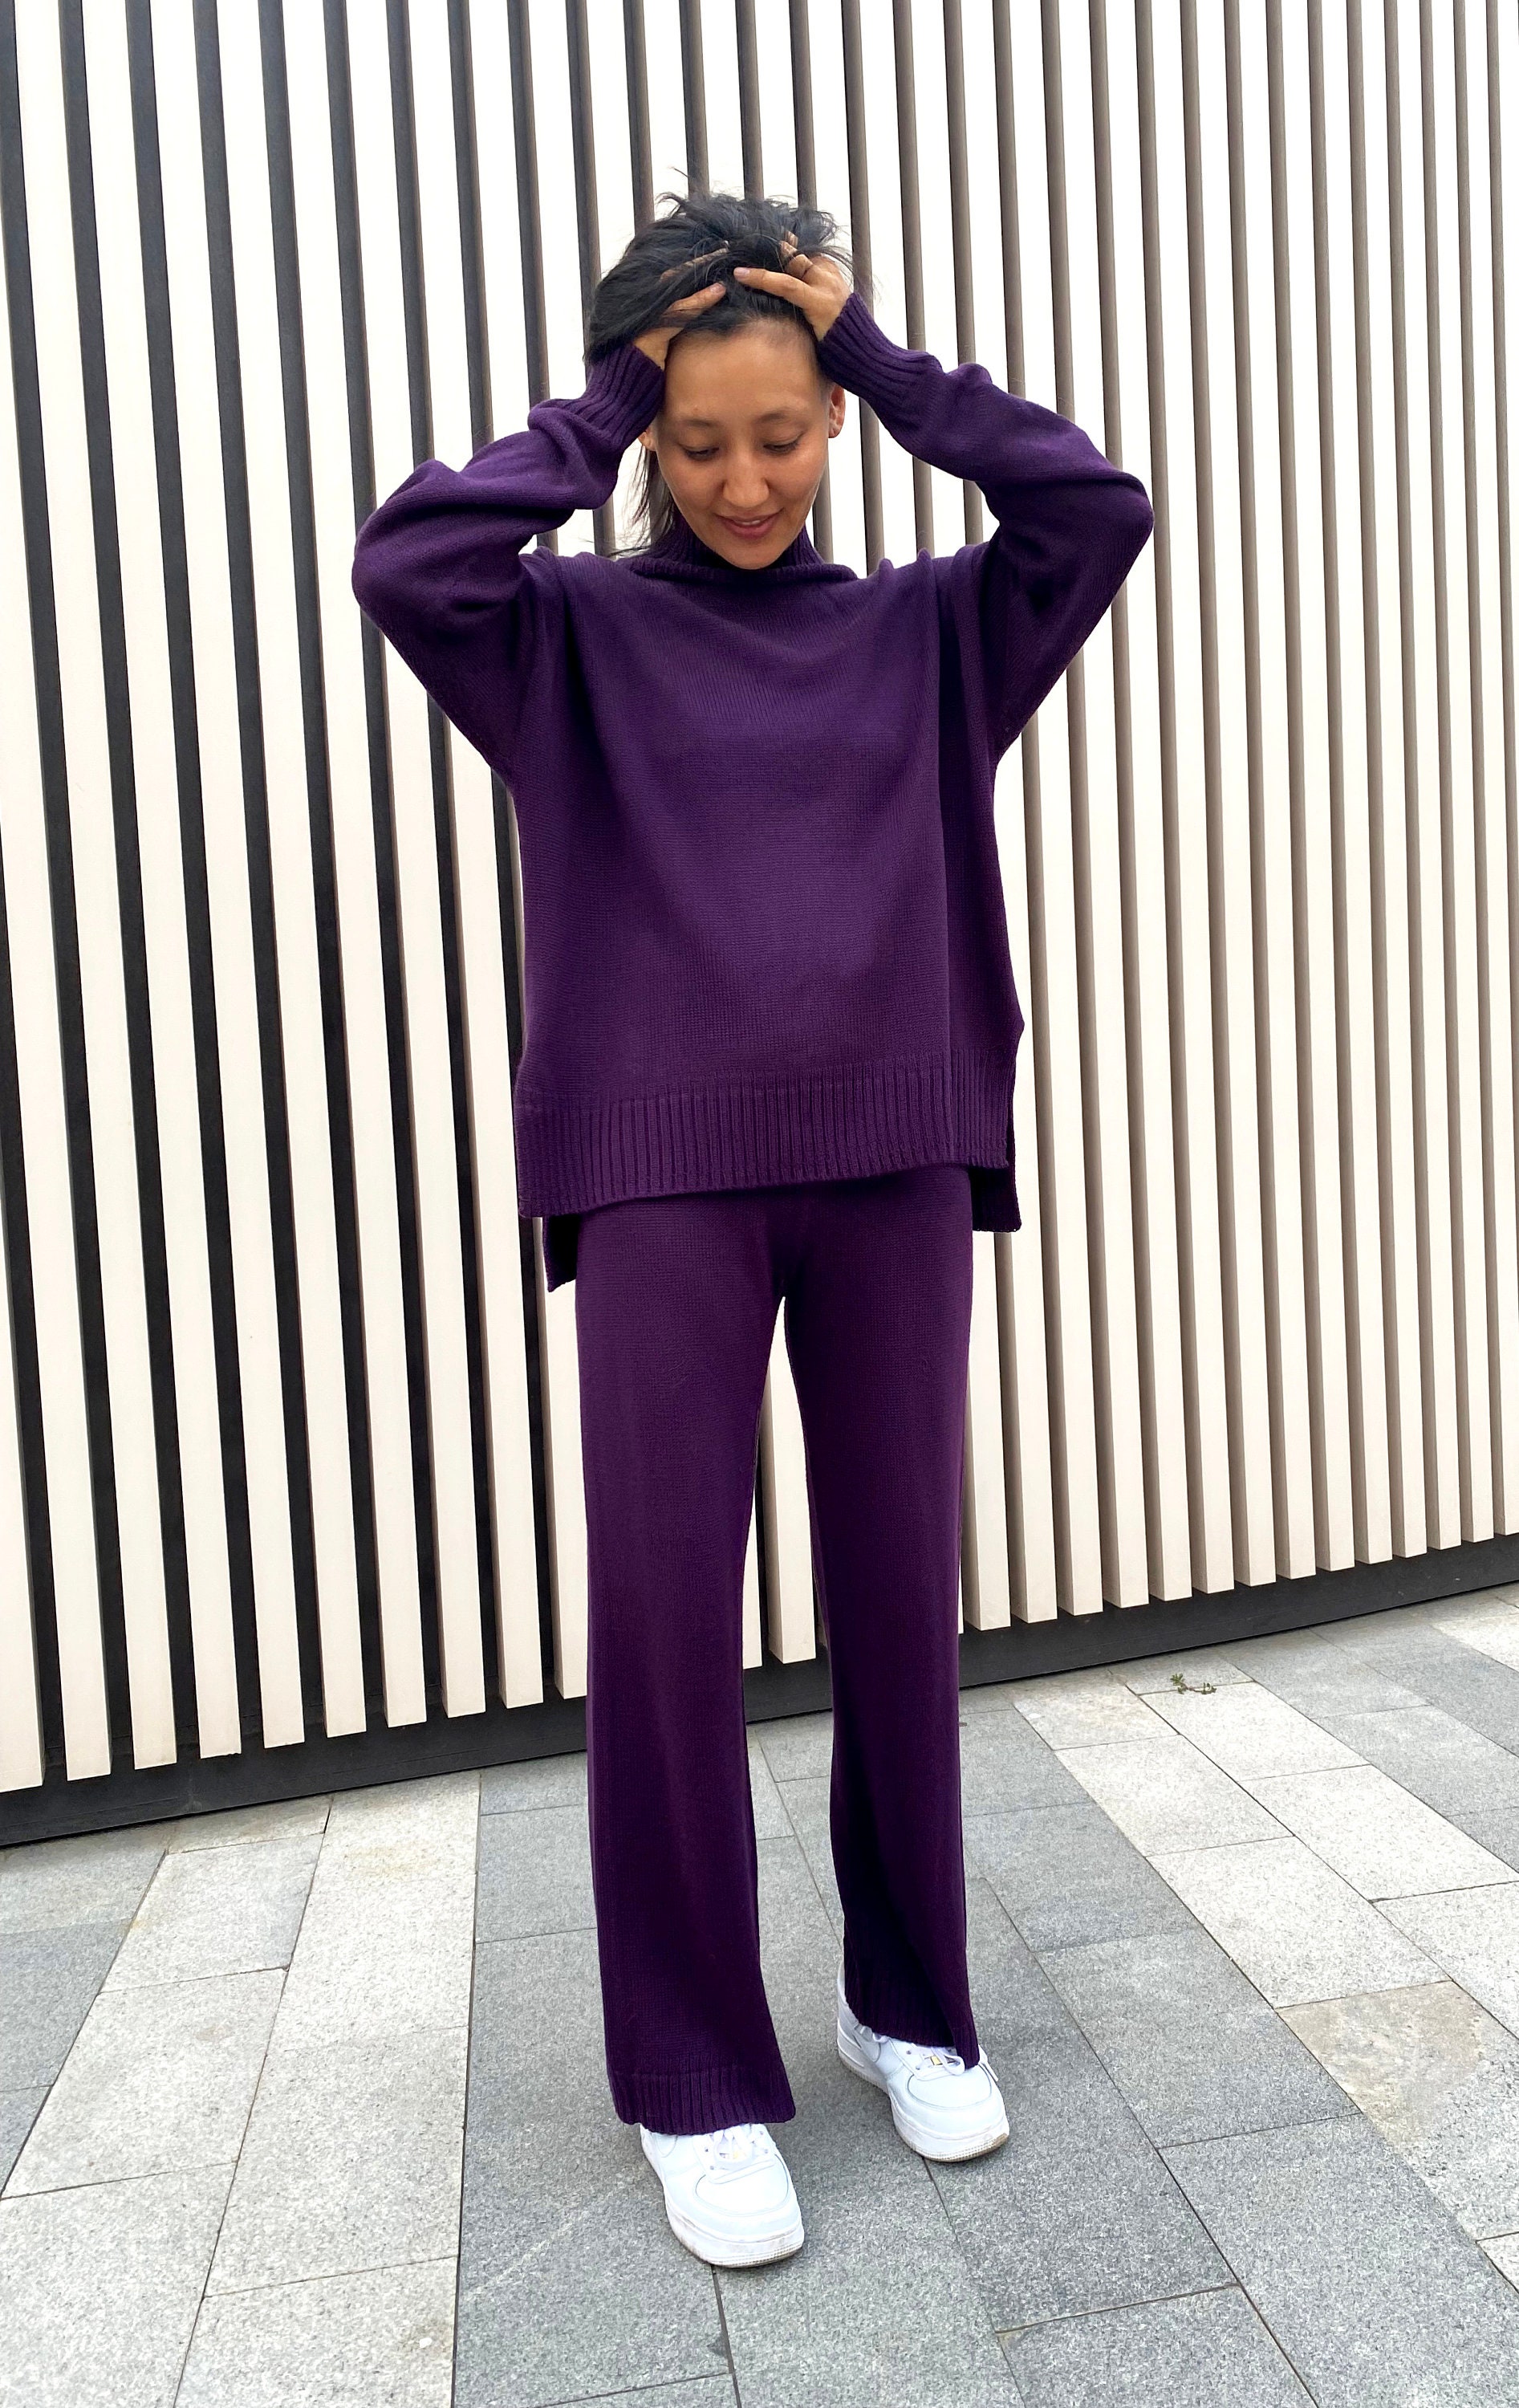 Knit Suit for Women. Matching Set of Highneck Sweater and Loose High Waist  Pants. Oversized Turtleneck Sweater. Knit Pants and Sweater. -  Norway